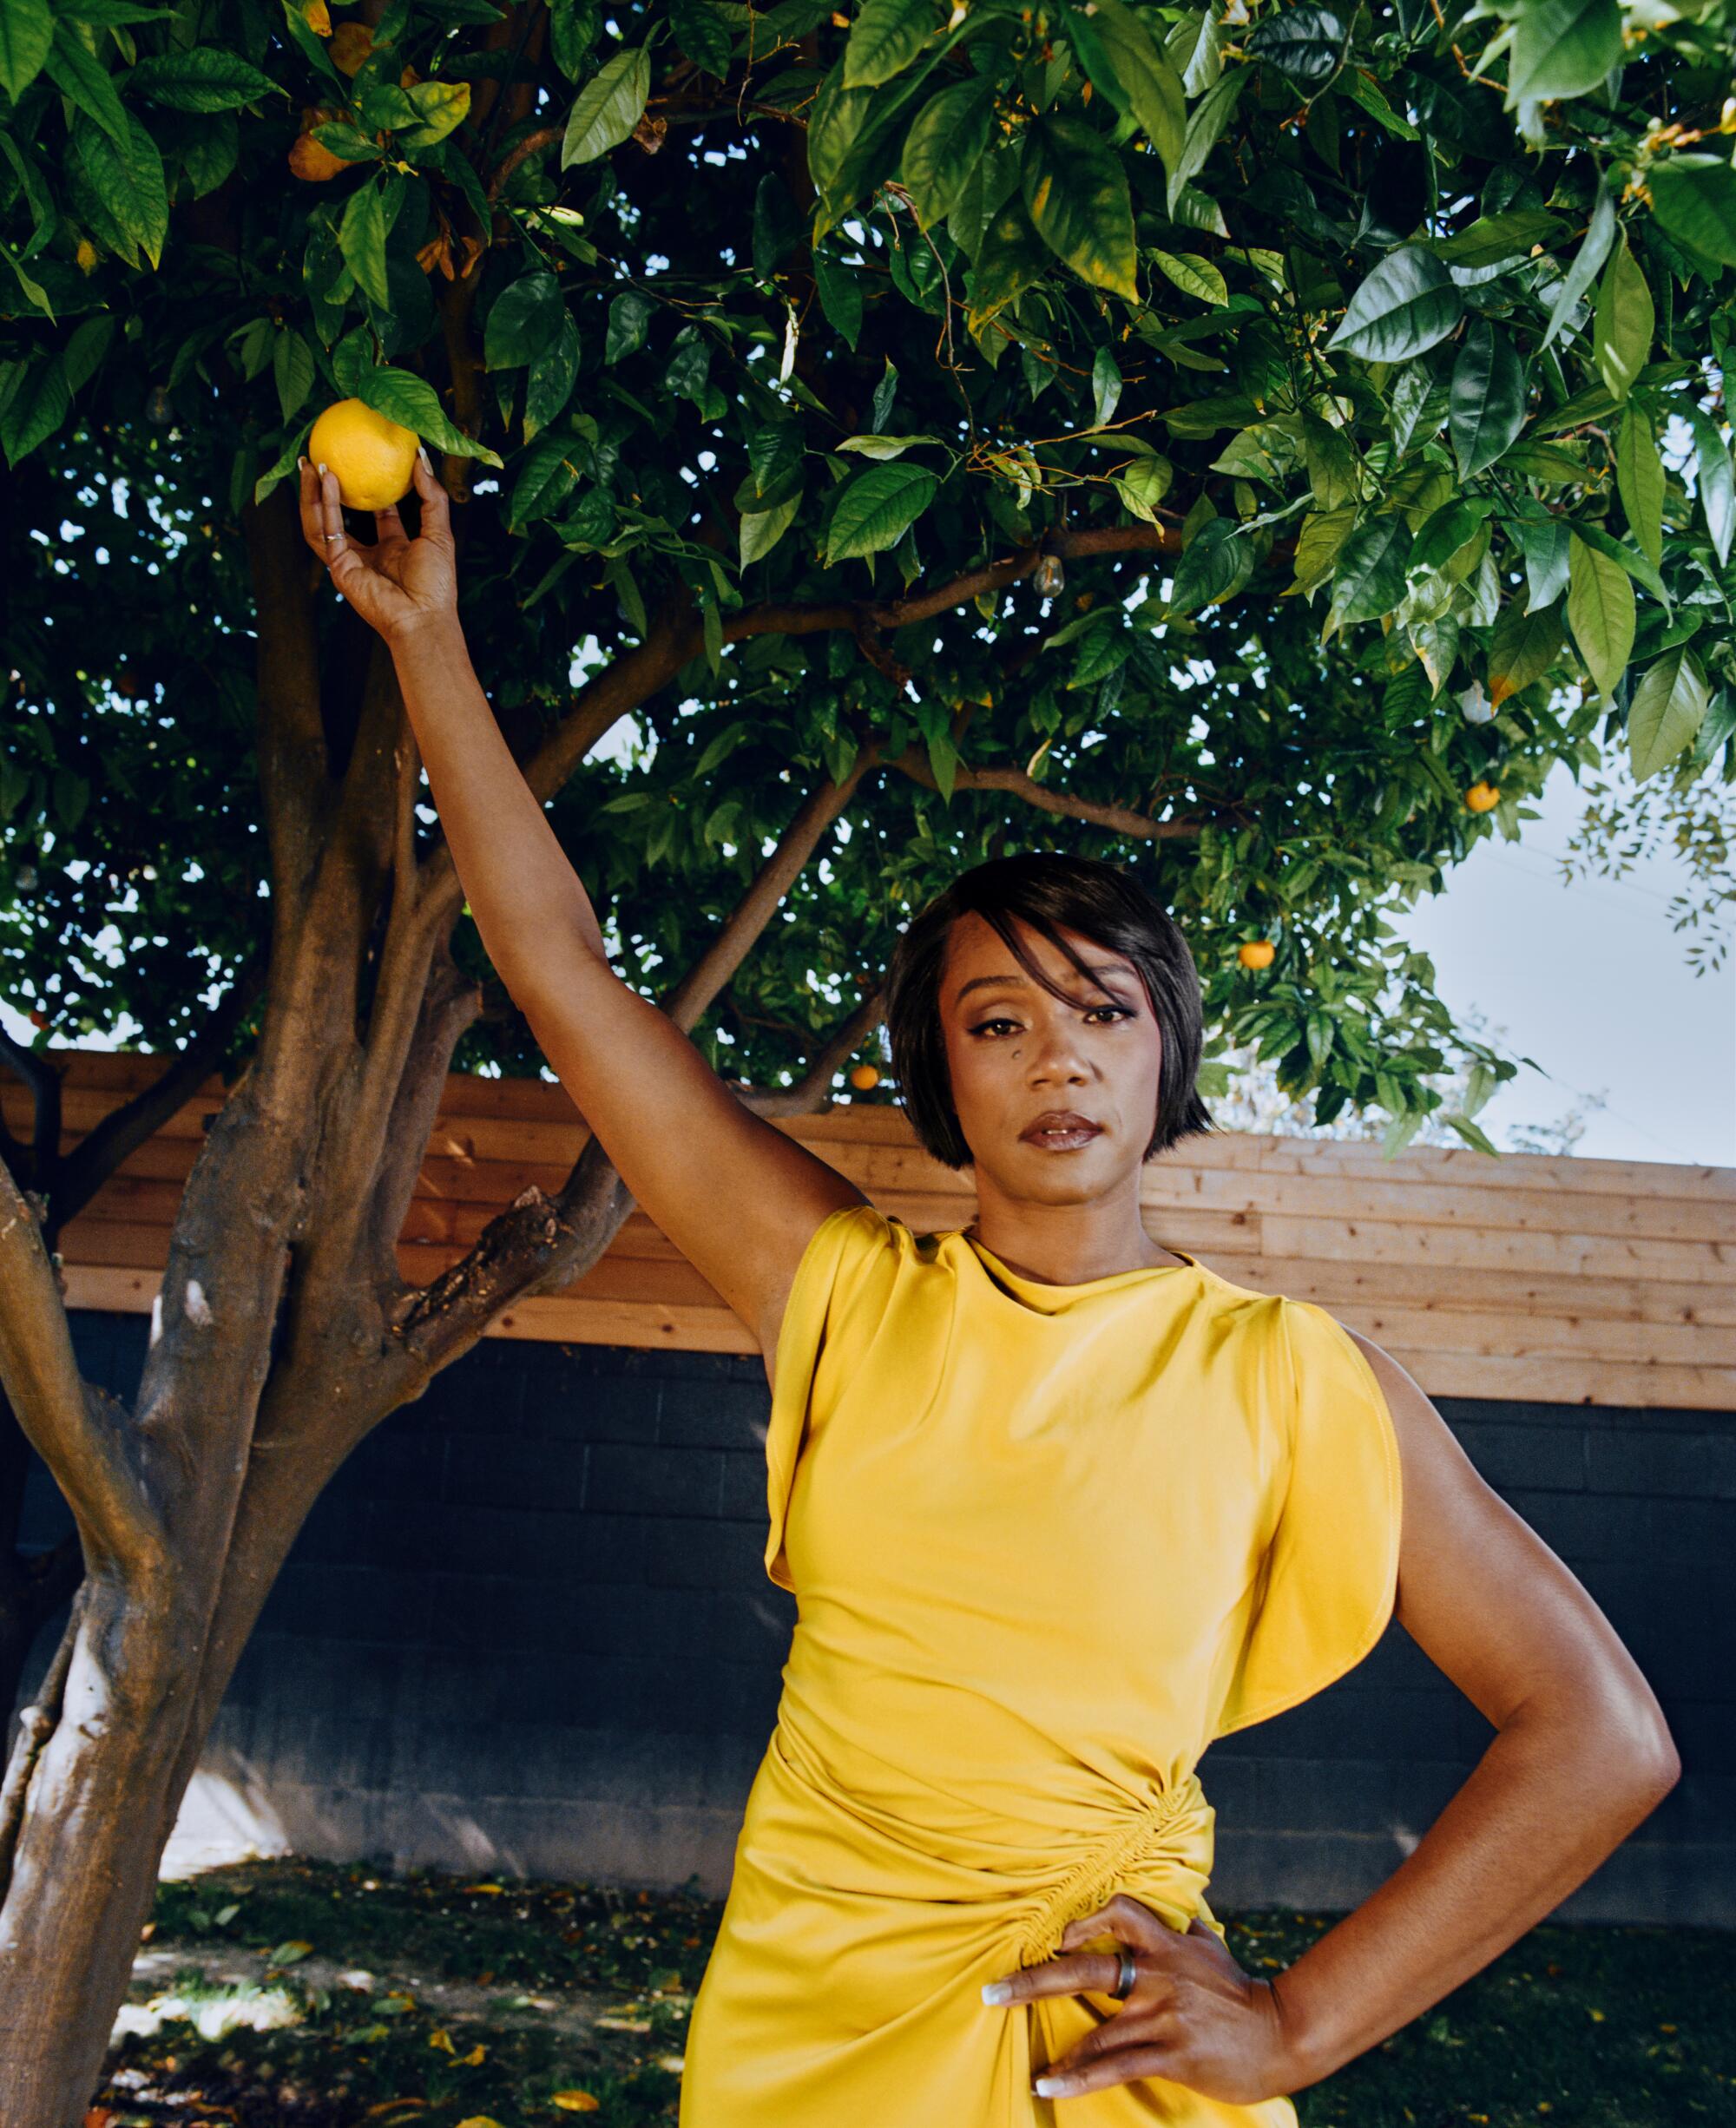 Tiffany Haddish, in a yellow dress, reaches one arm up to pick a piece of fruit off a tree at her home